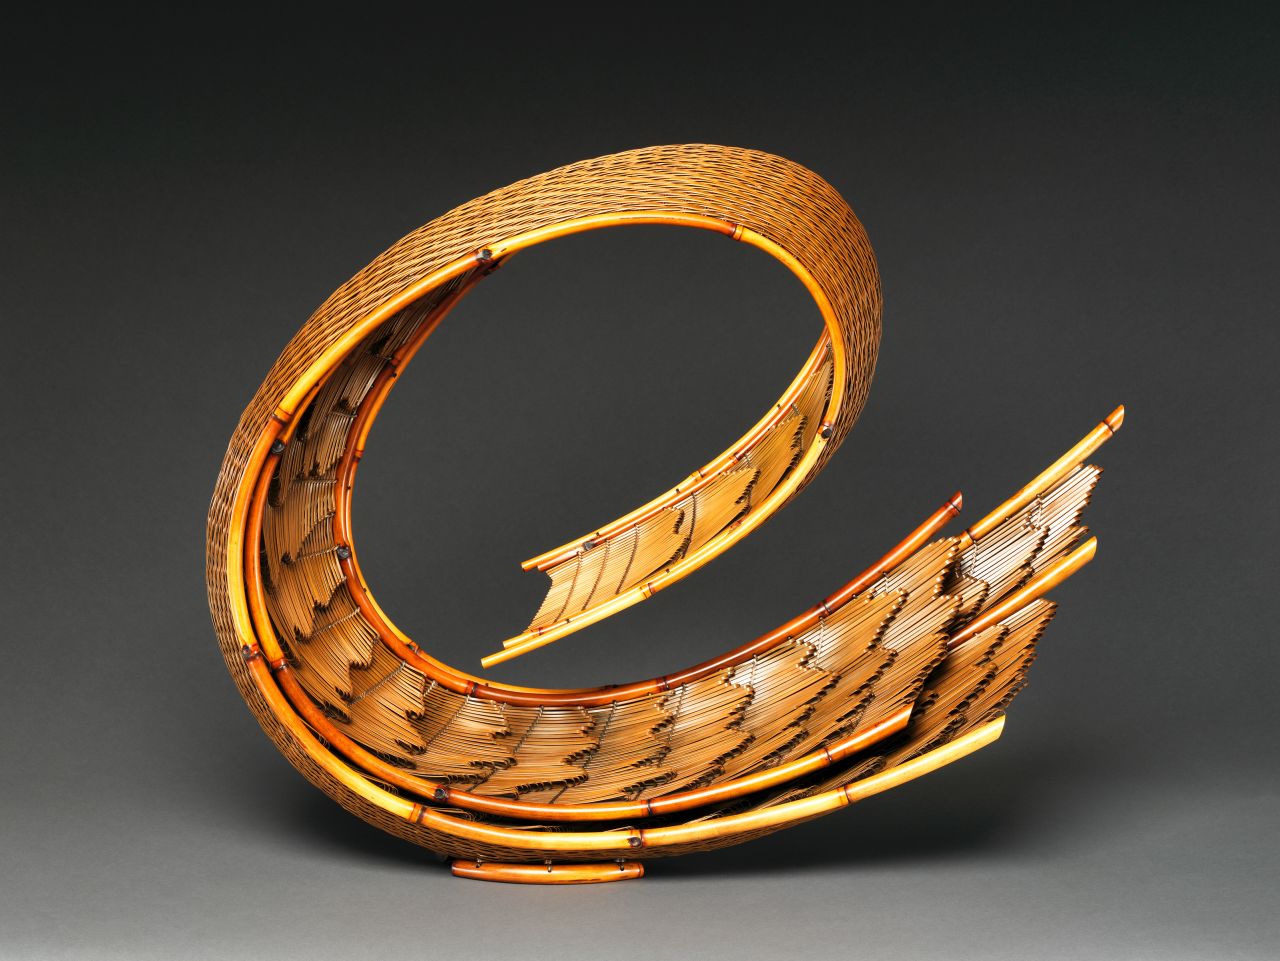 One of the more than 70 bamboo works on display at the Metropolitan Museum of Art's current exhibition "Japanese Bamboo Art: The Abbey Collection."